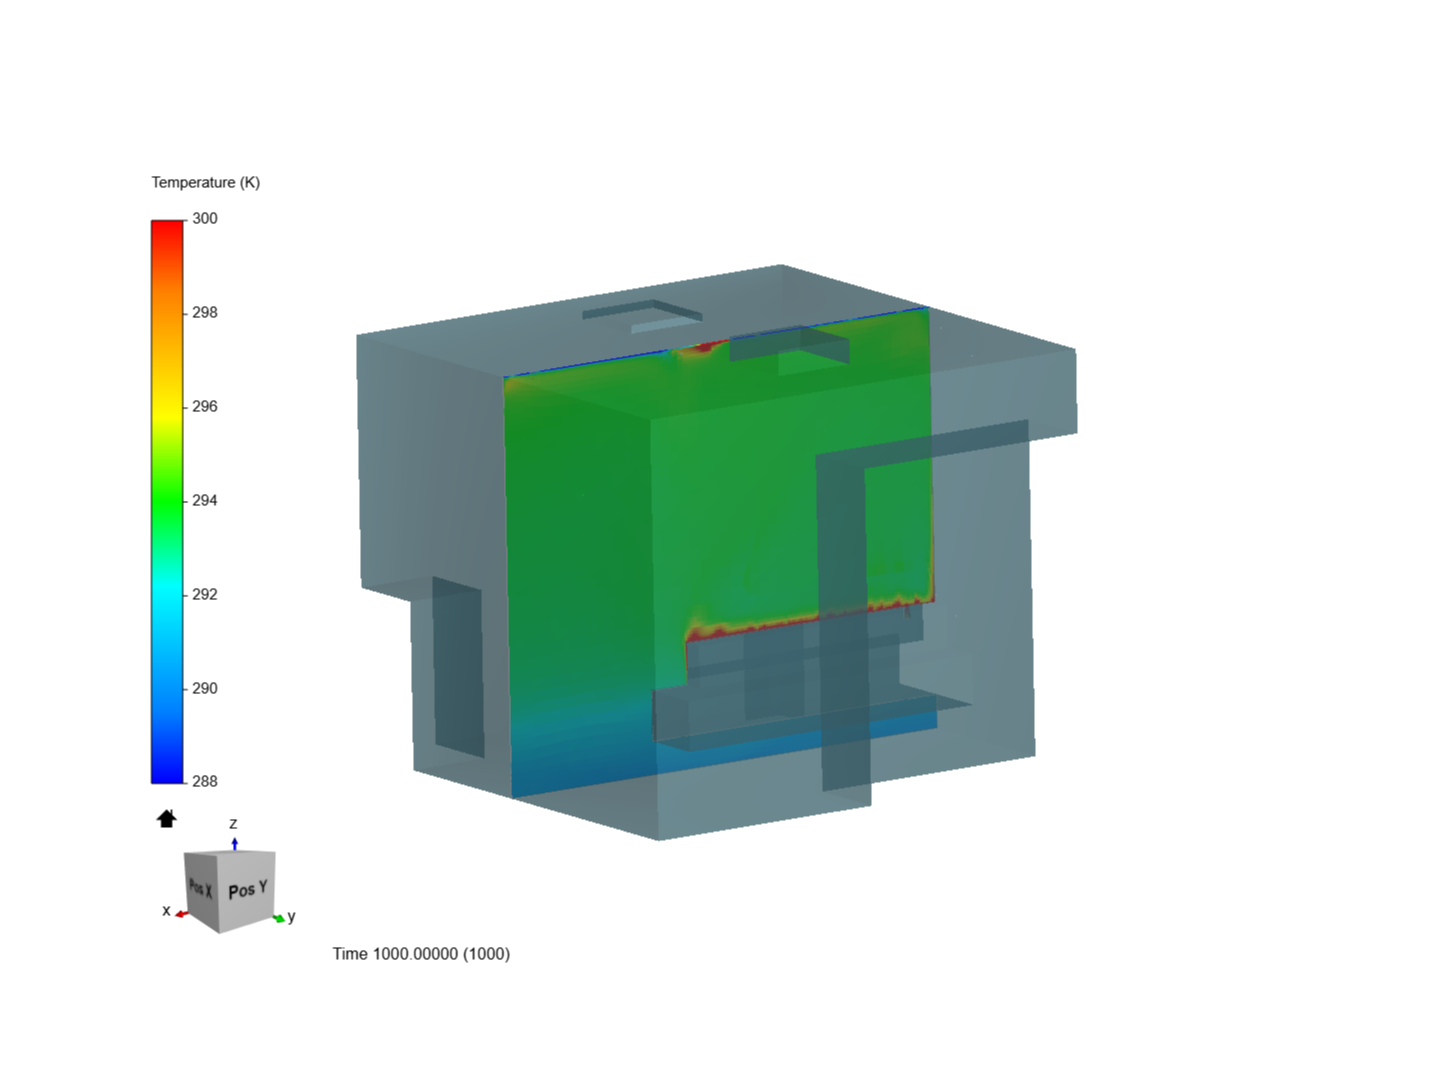 Simulate Airflow in Hospital - Copy image